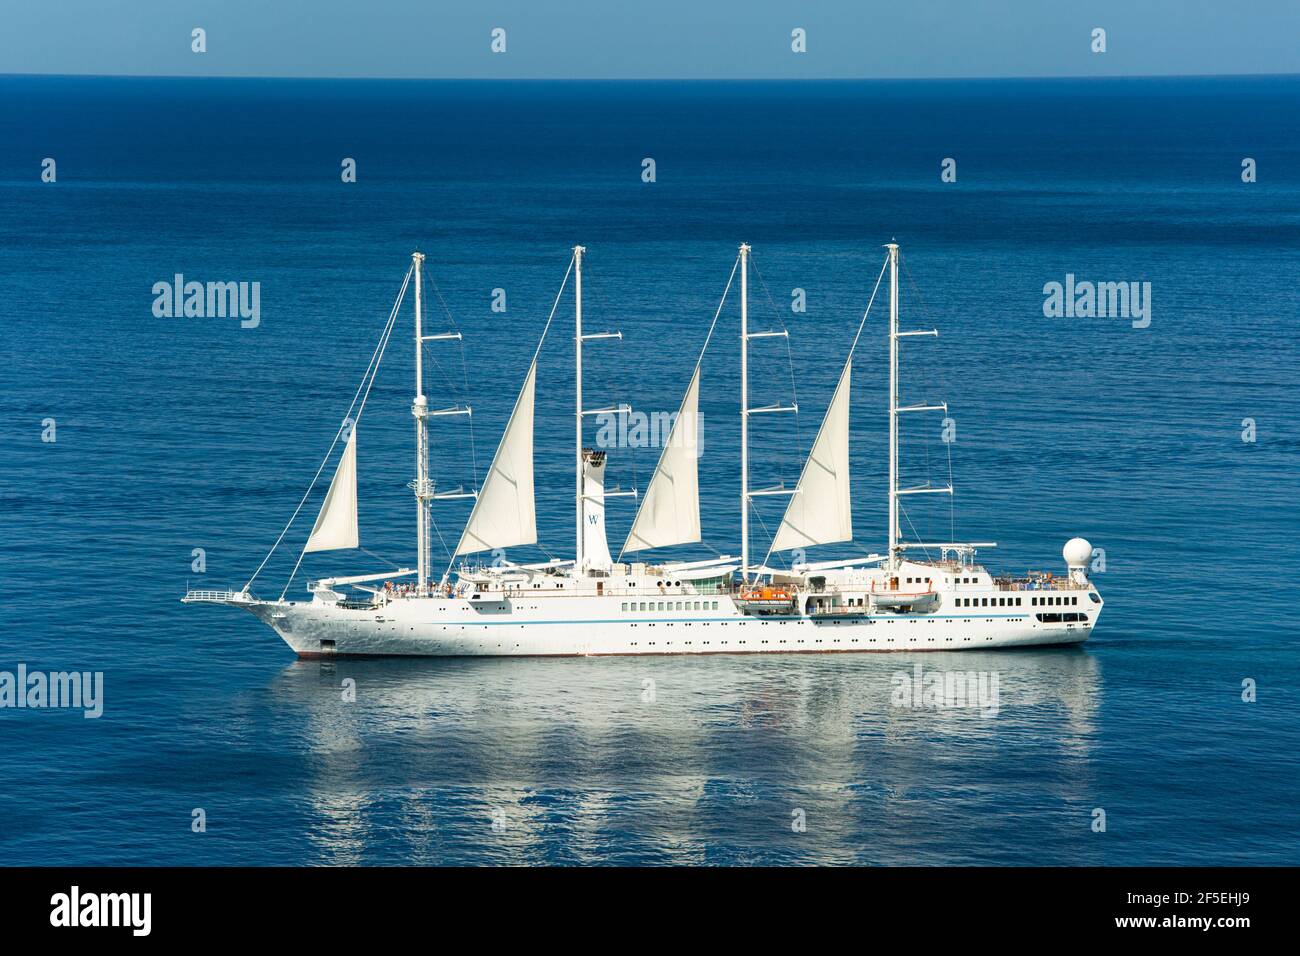 Soufriere, St Lucia. Four-masted luxury cruise ship, the Wind Star, under sail in Soufriere Bay. Stock Photo